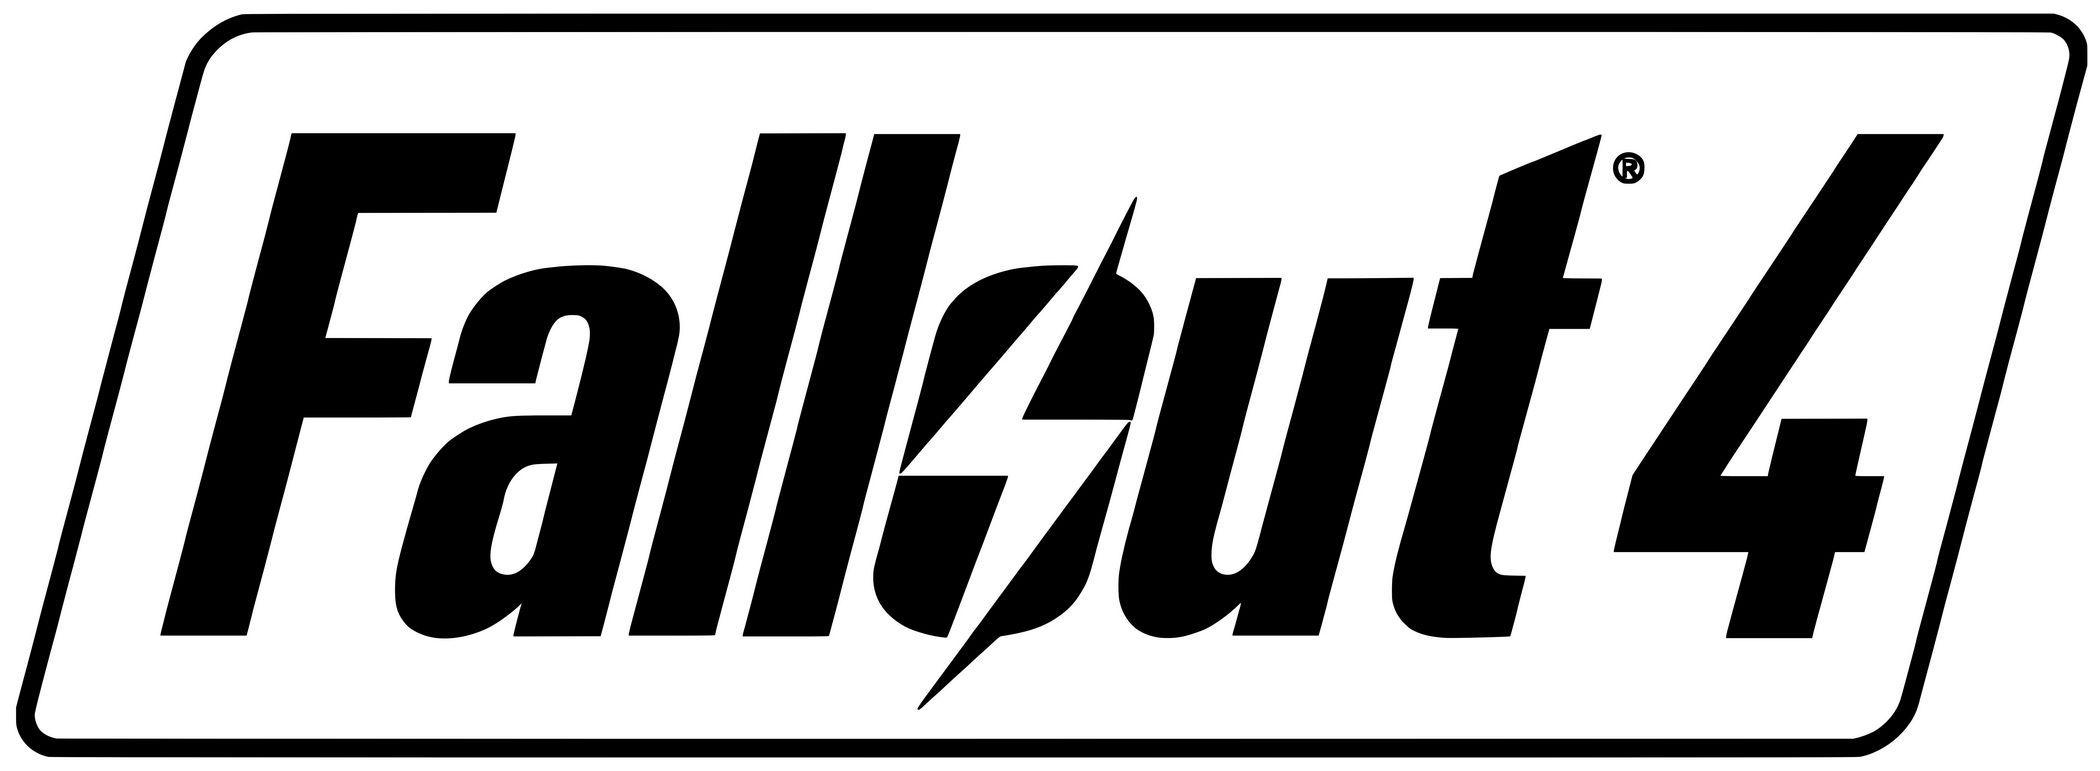 Fallout Logo - Fallout Logo. Fallout. Fallout logo, Fallout 4 weapons, Fallout 4